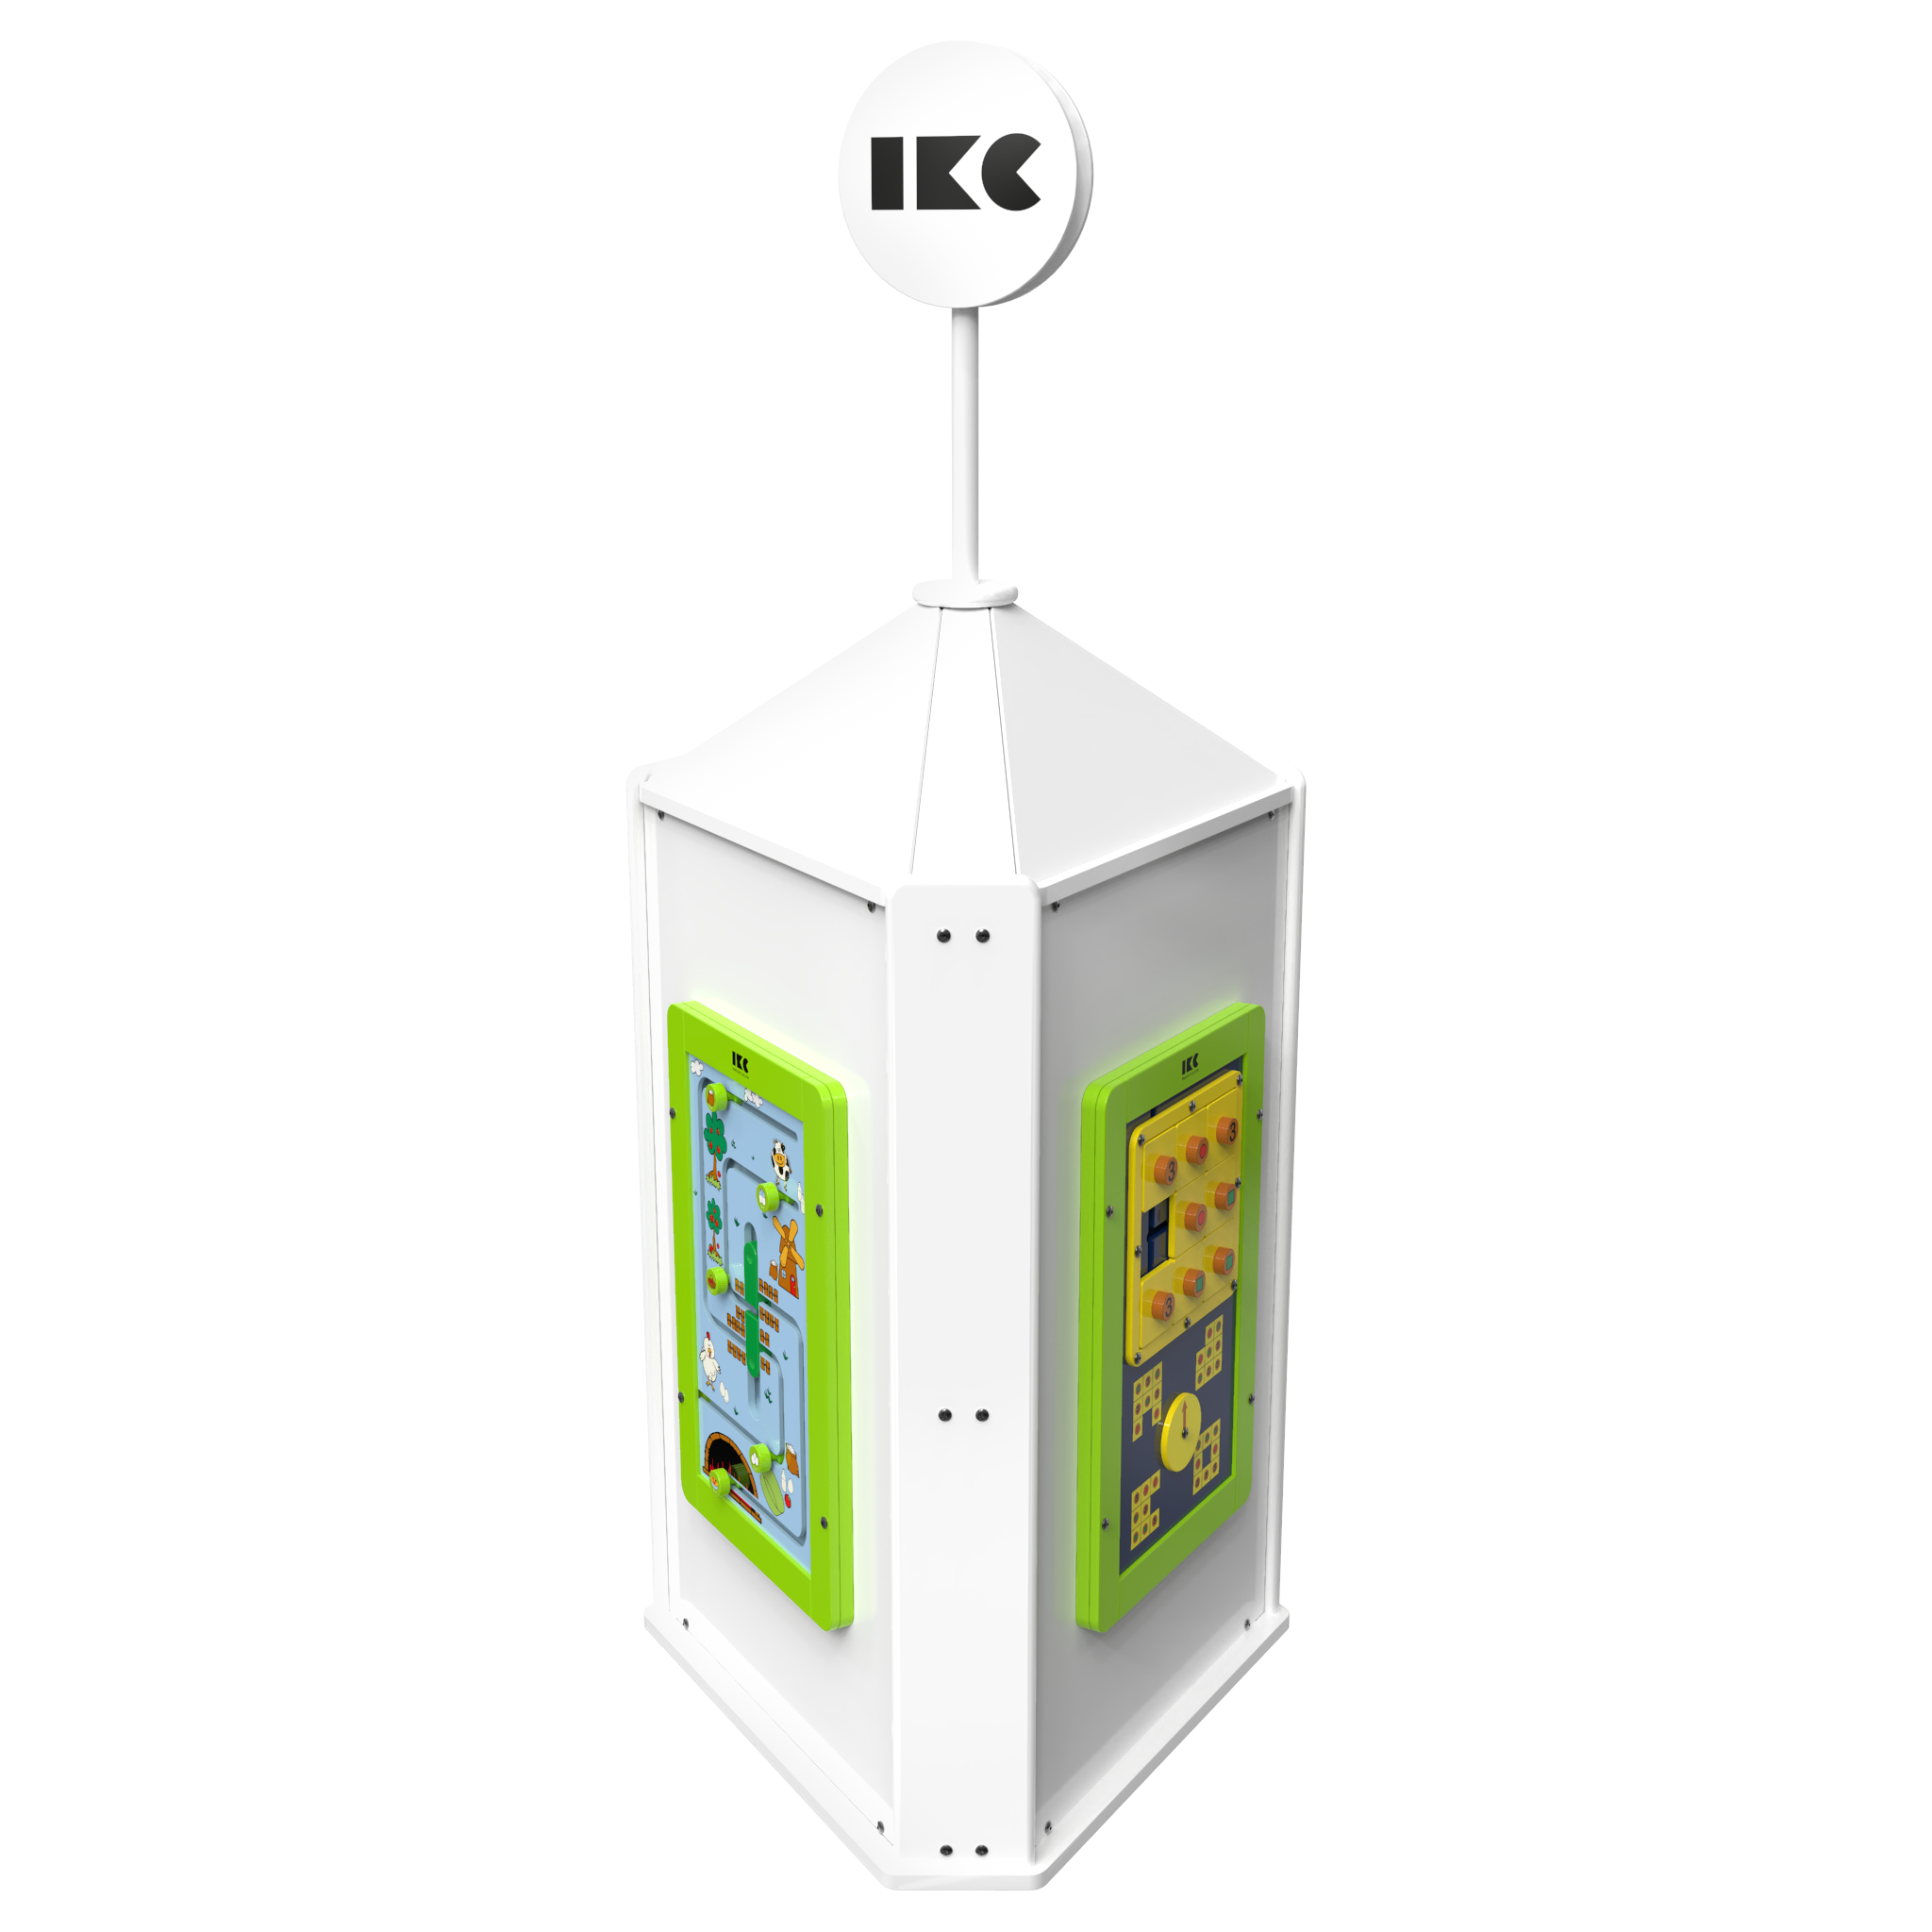 This image shows a play system | IKC play systems